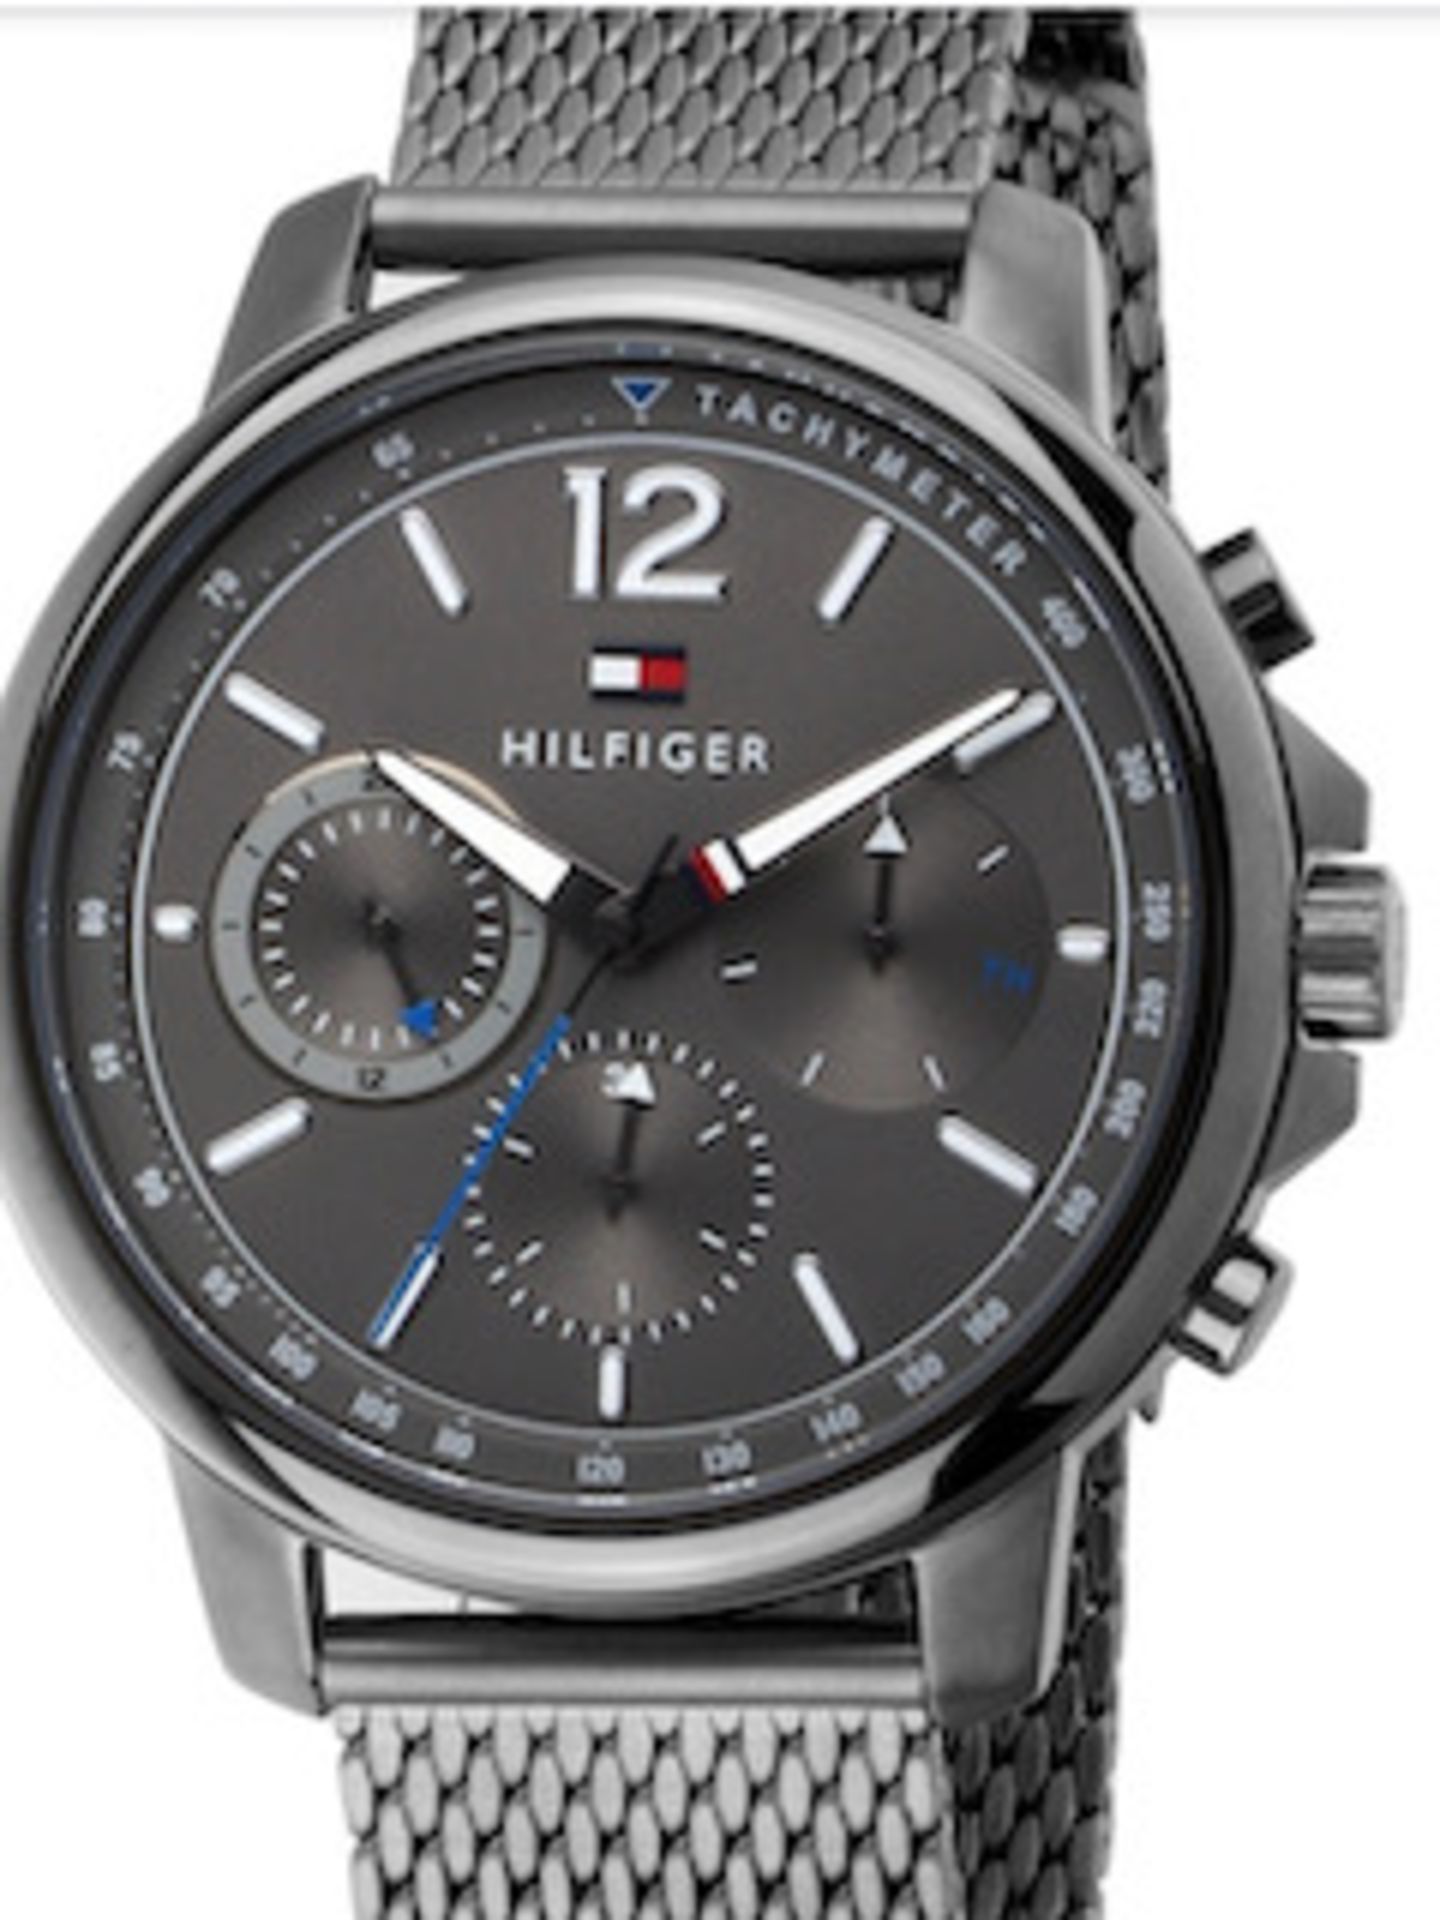 Tommy Hilfiger Men's Multi Dial Quartz Watch With Stainless Steel Strap 1791530 - Image 2 of 5